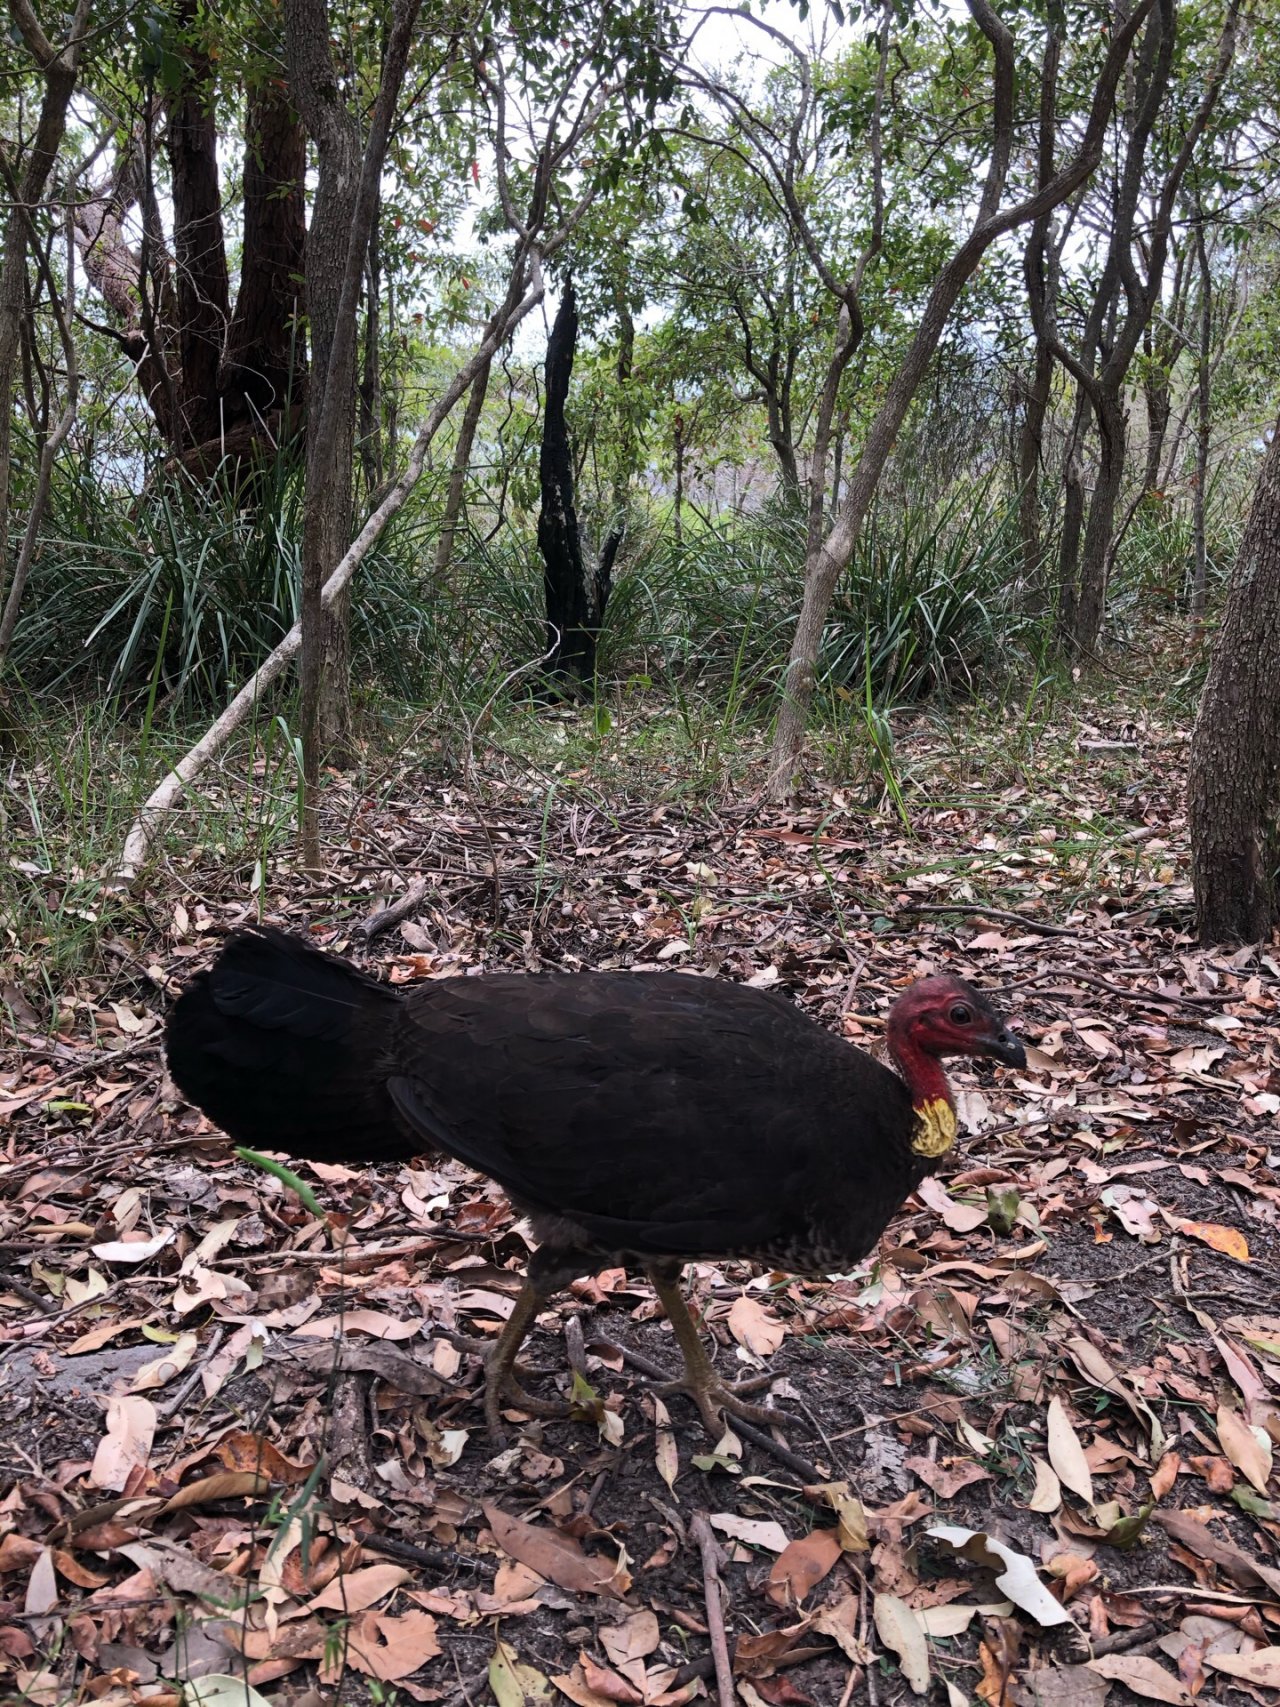 Brush-turkey in Big City Birds App spotted by Cockie on 13.12.2020